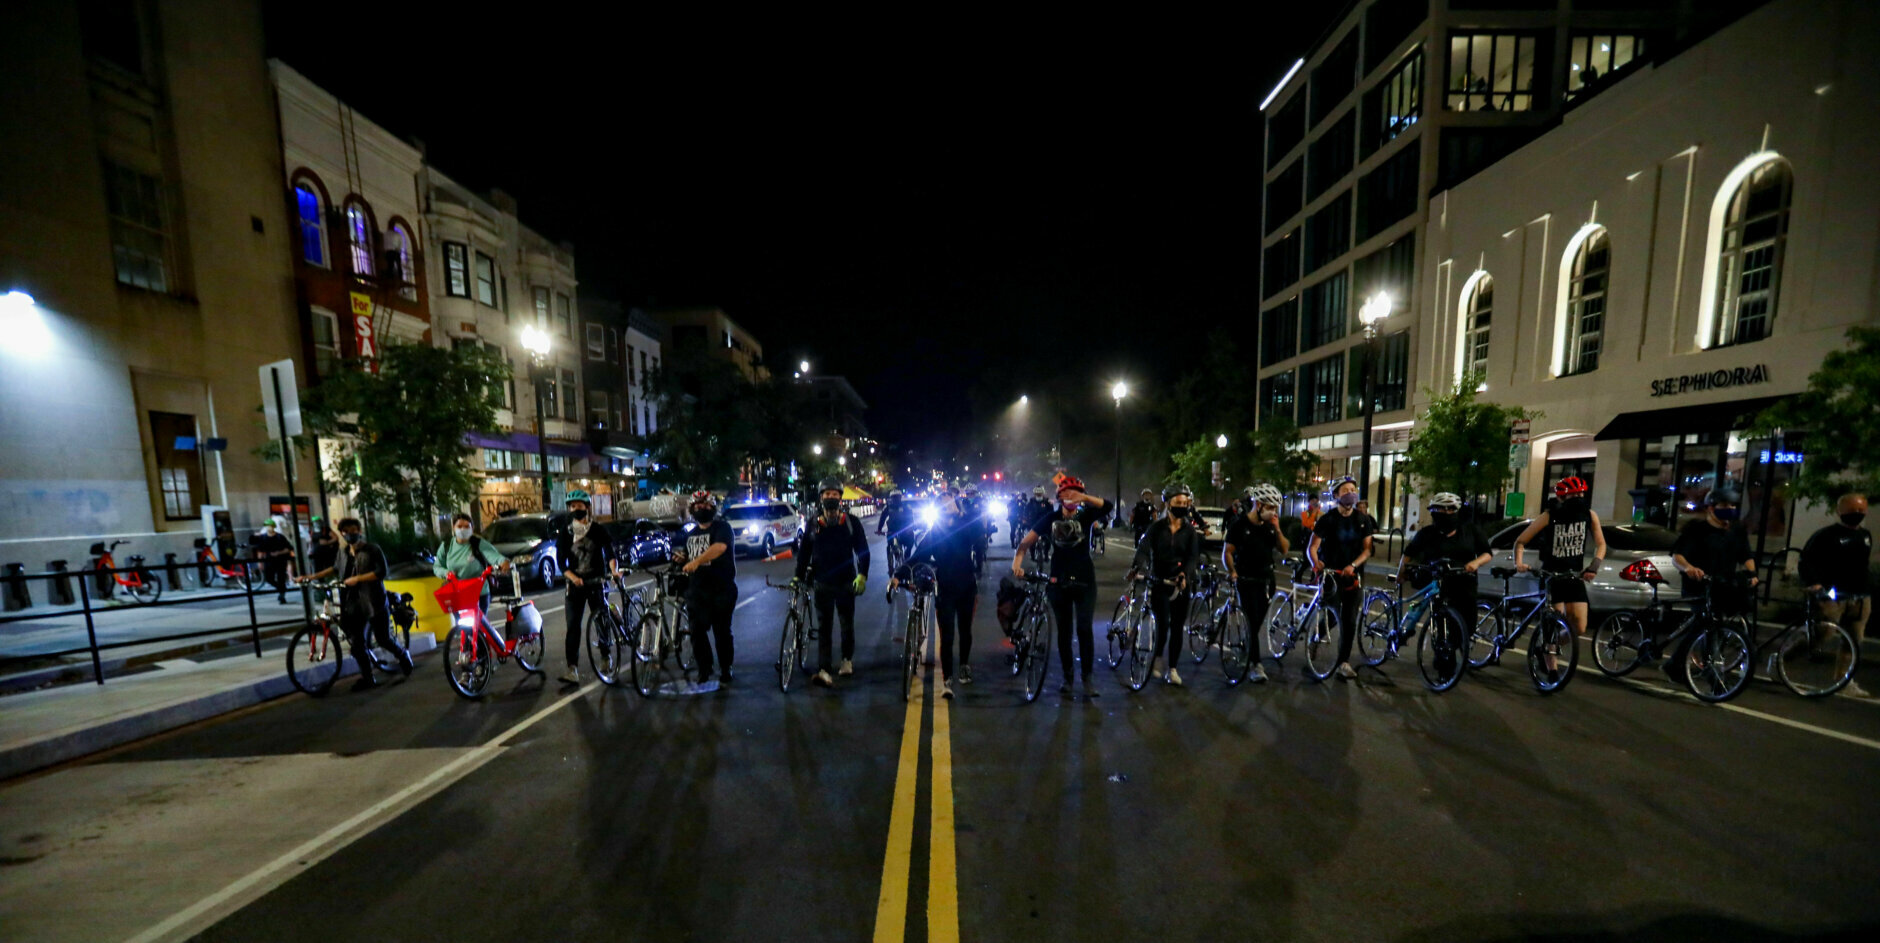 WASHINGTON, UNITED STATES - SEPTEMBER 24: Demonstrators march in Washington D.C. protest following a Kentucky grand jury decision in the Breonna Taylor case on September 24, 2020 in Washington, DC (Photo by Yasin Ozturk/Anadolu Agency via Getty Images)